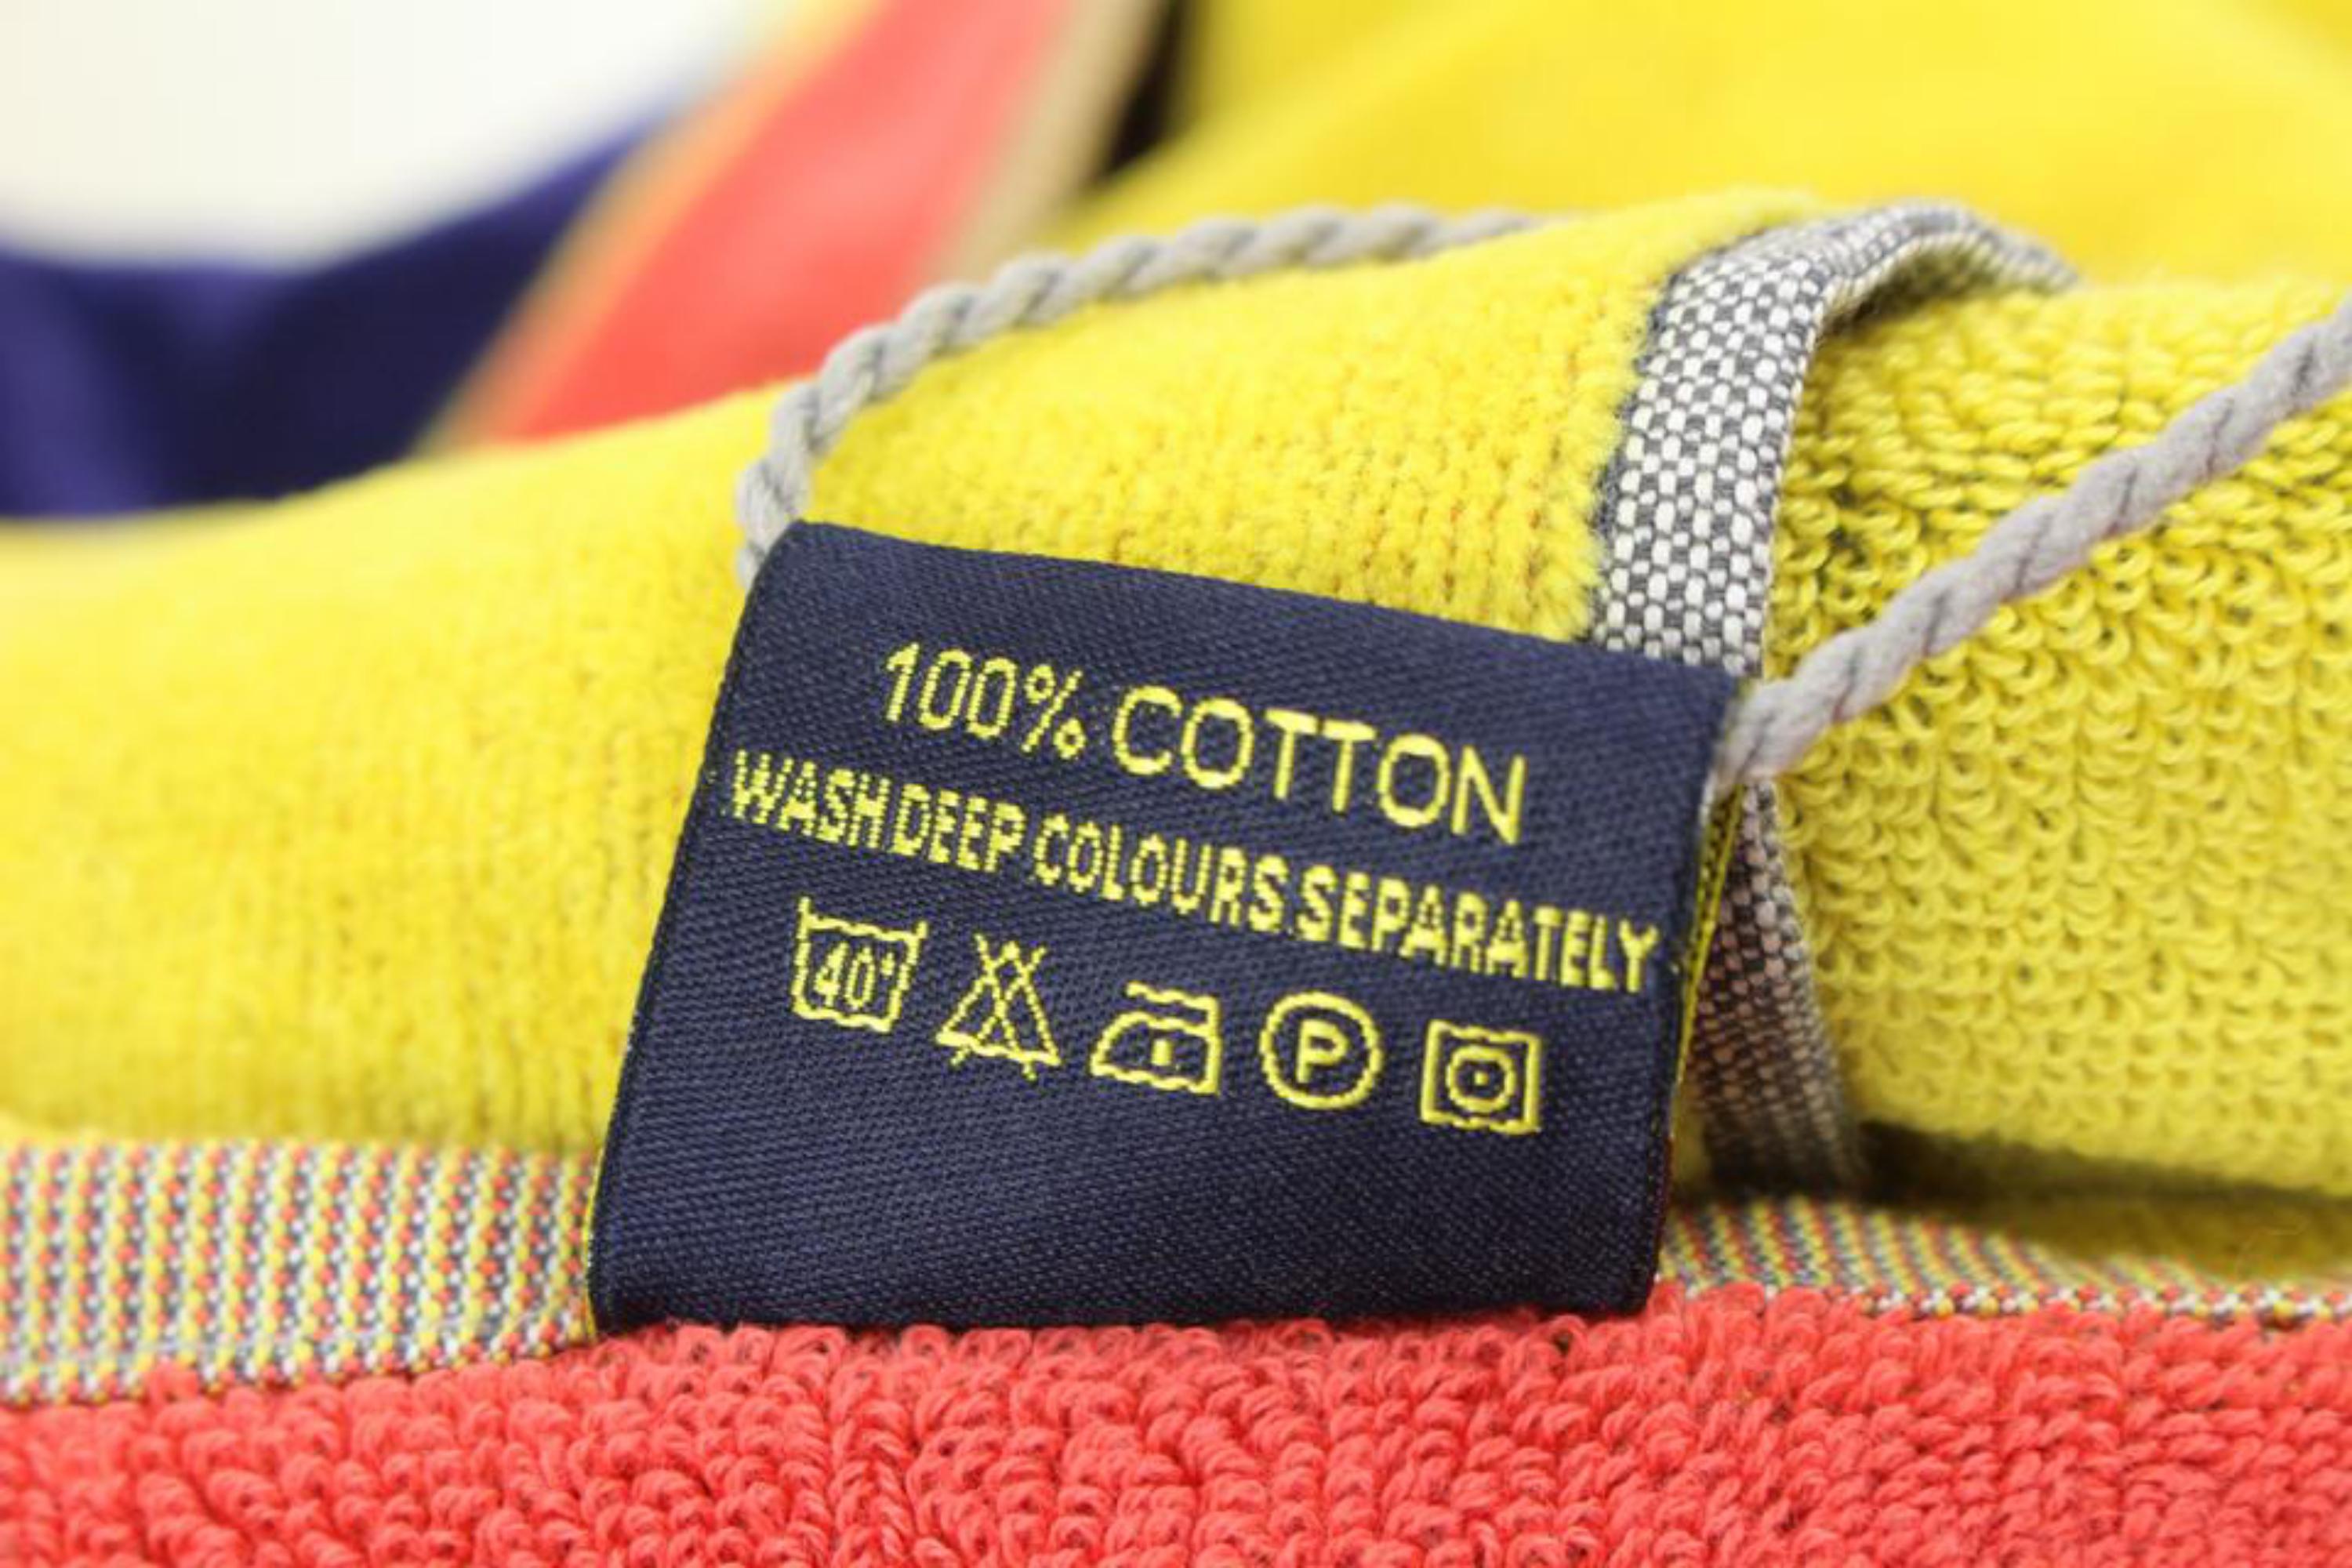 Louis Vuitton XL Huge Blue x Yellow x Red 2003 Auckland LV Cup Towel Throw 77lz422s
Made In: France
Measurements: Length:  76.5